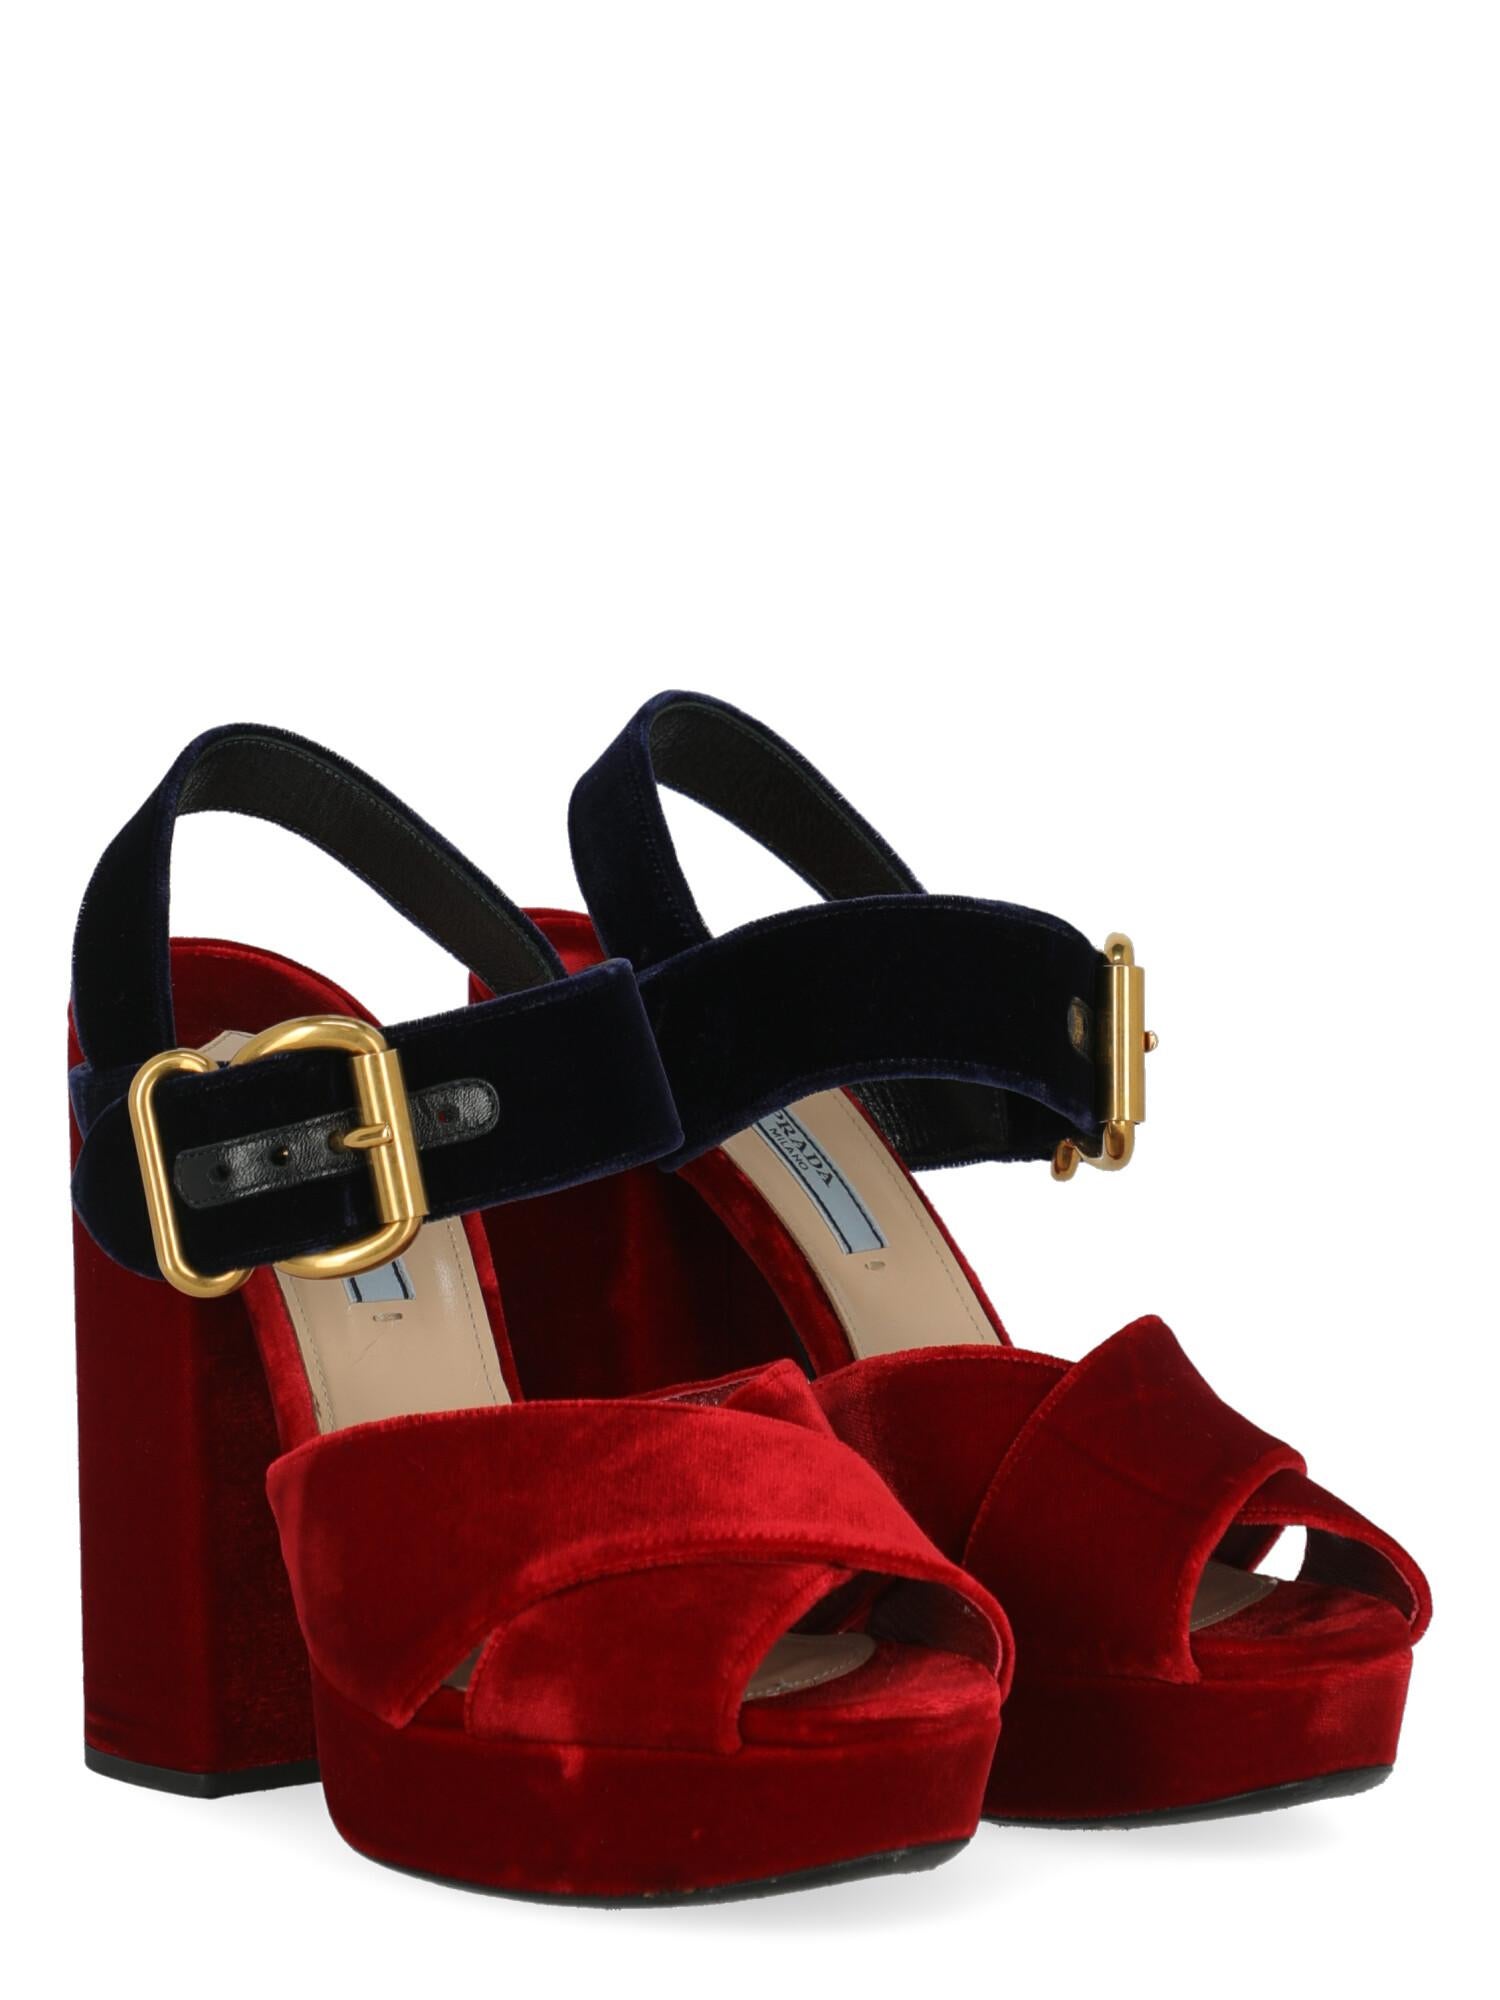 Product Description: Shoe, fabric, solid color, velvet, buckle fastening, gold-tone hardware, open toe, branded insole, non-slip sole, block heel, high heel

Includes:
- Dust bag

Product Condition: Very Good
Heel: negligible marks. Sole: visible